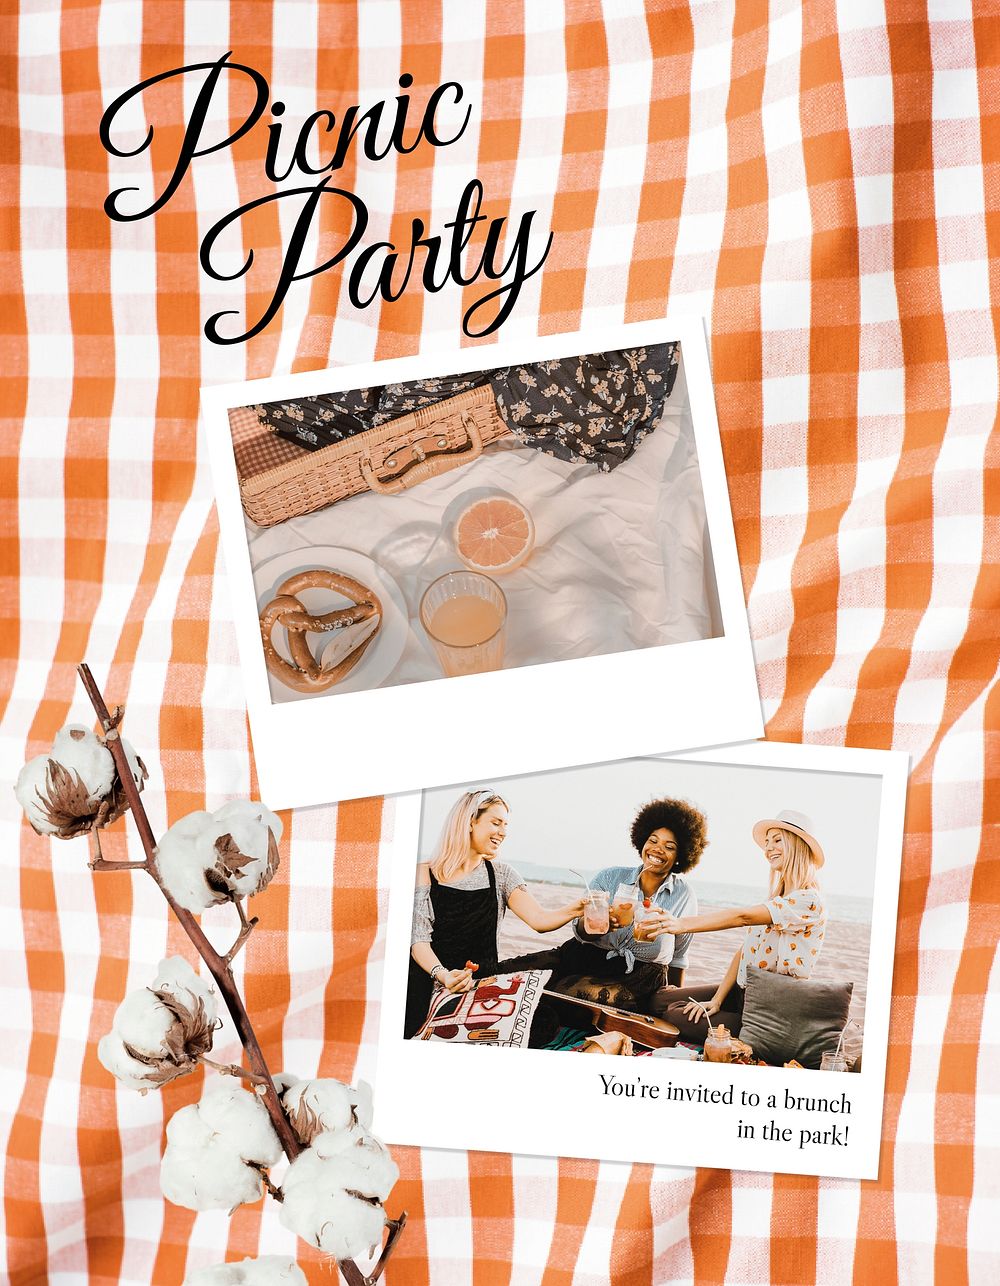 Picnic event flyer template, editable text psd